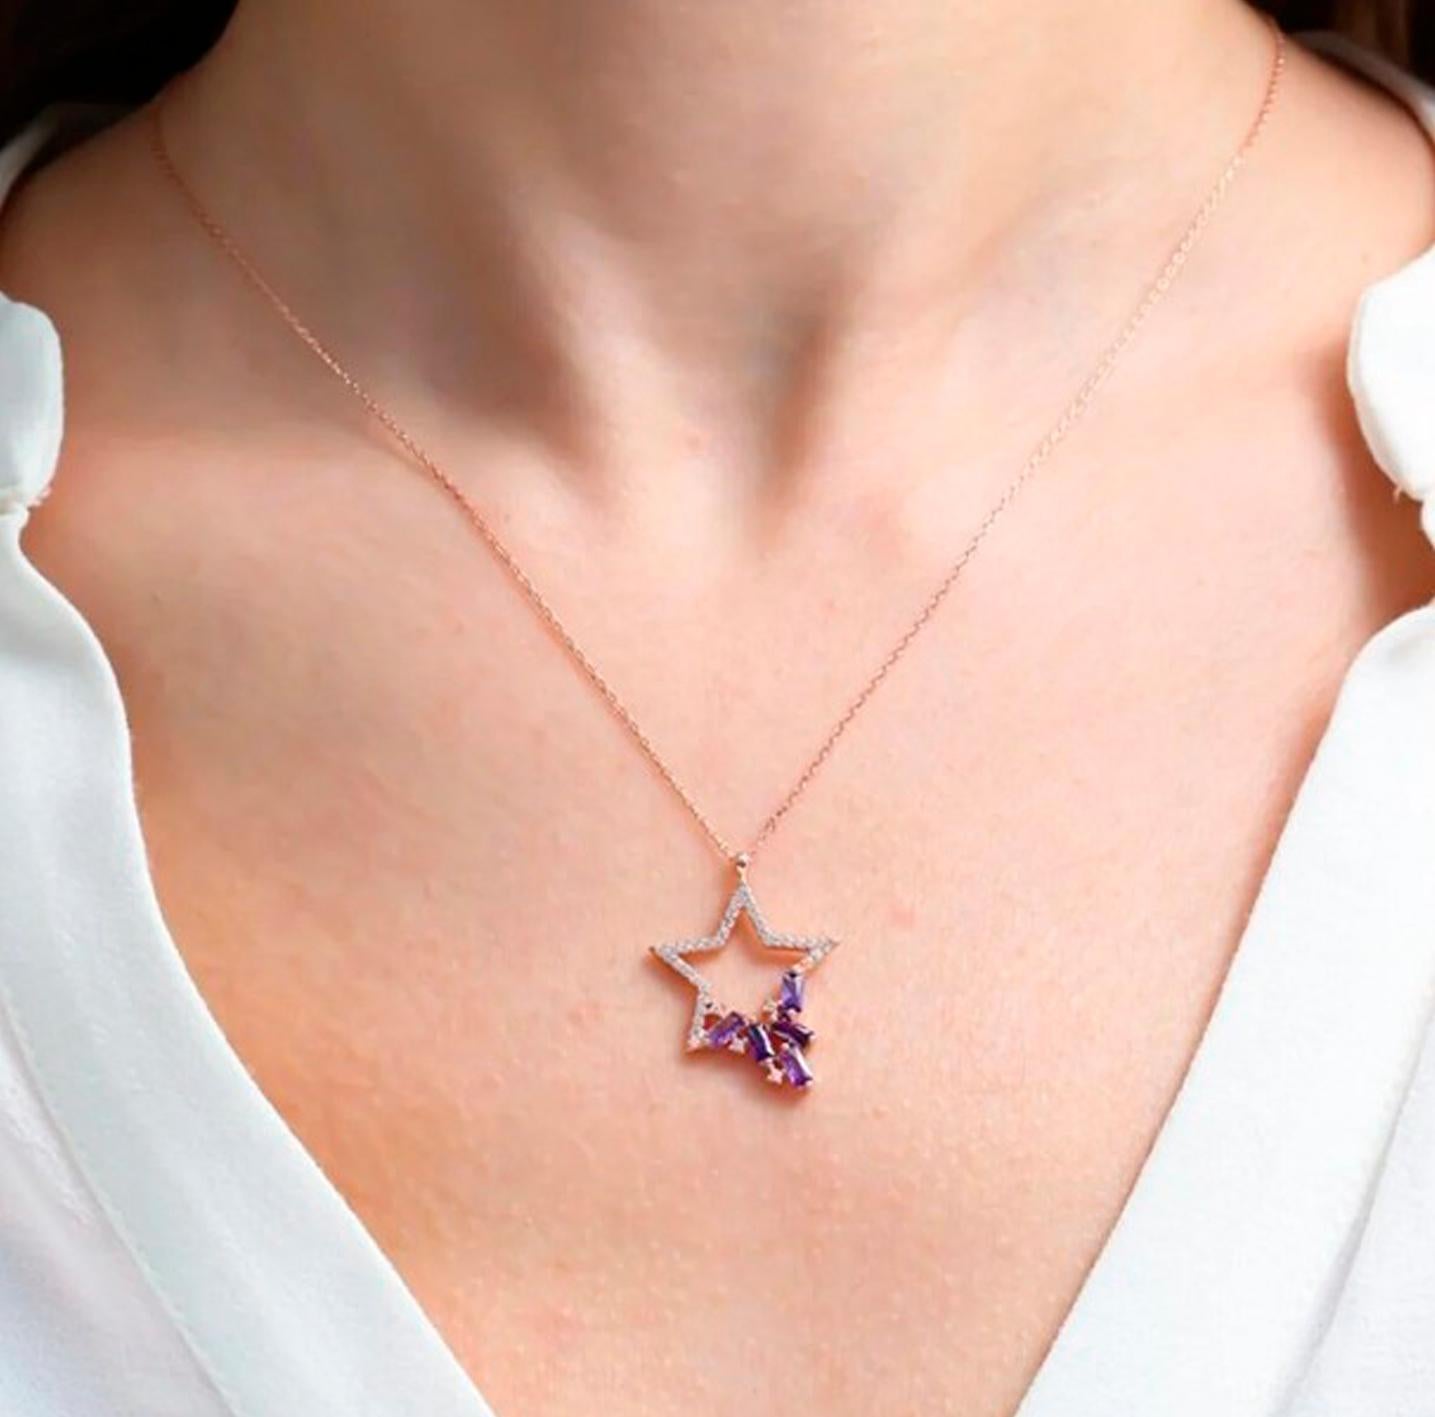 Women's Star pendant necklace with diamonds and amethysts in 14k gold.  For Sale